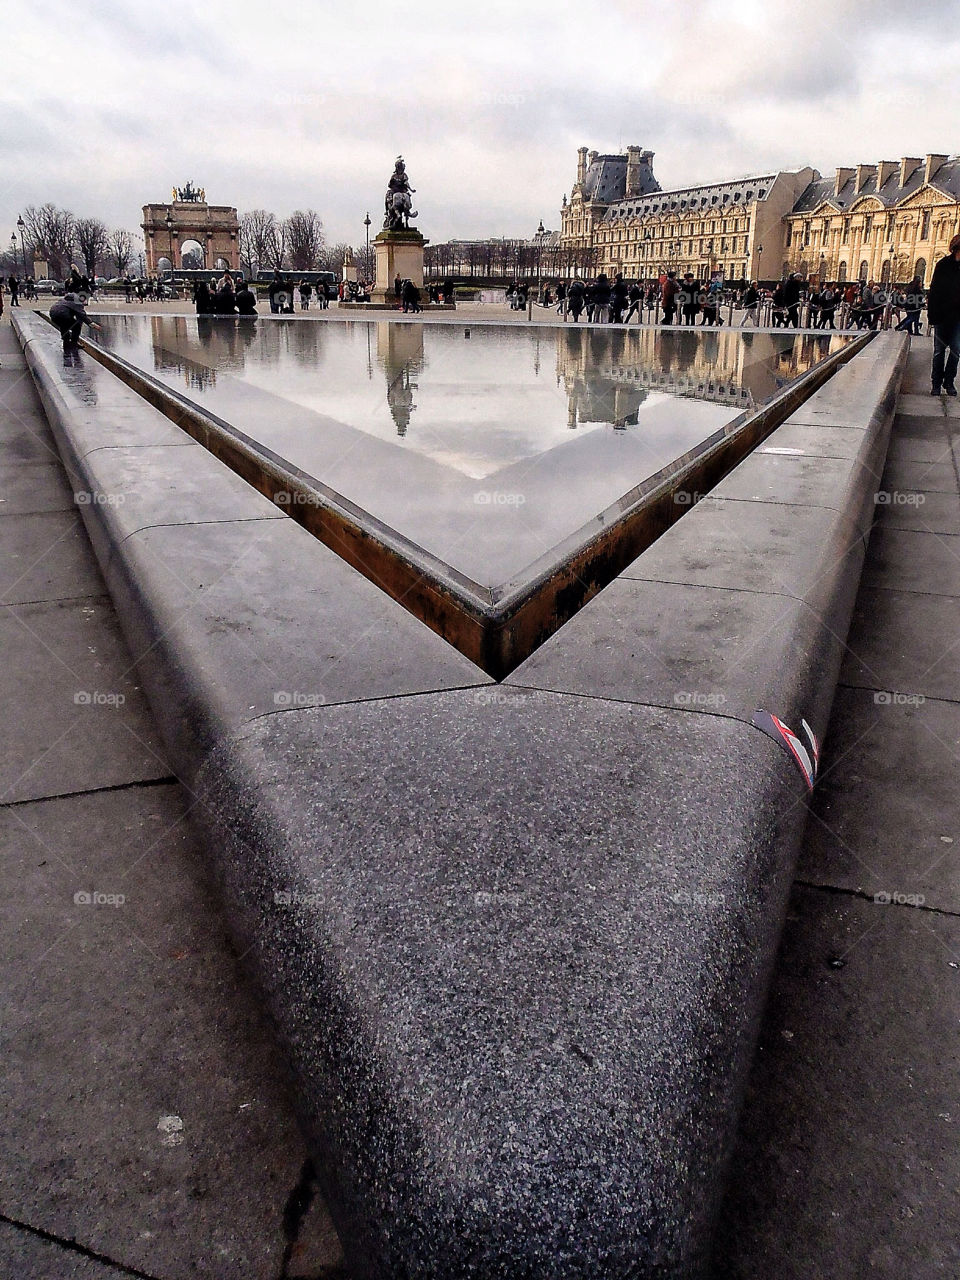 Reflection of buildings in the water at the Louvre Museum Paris